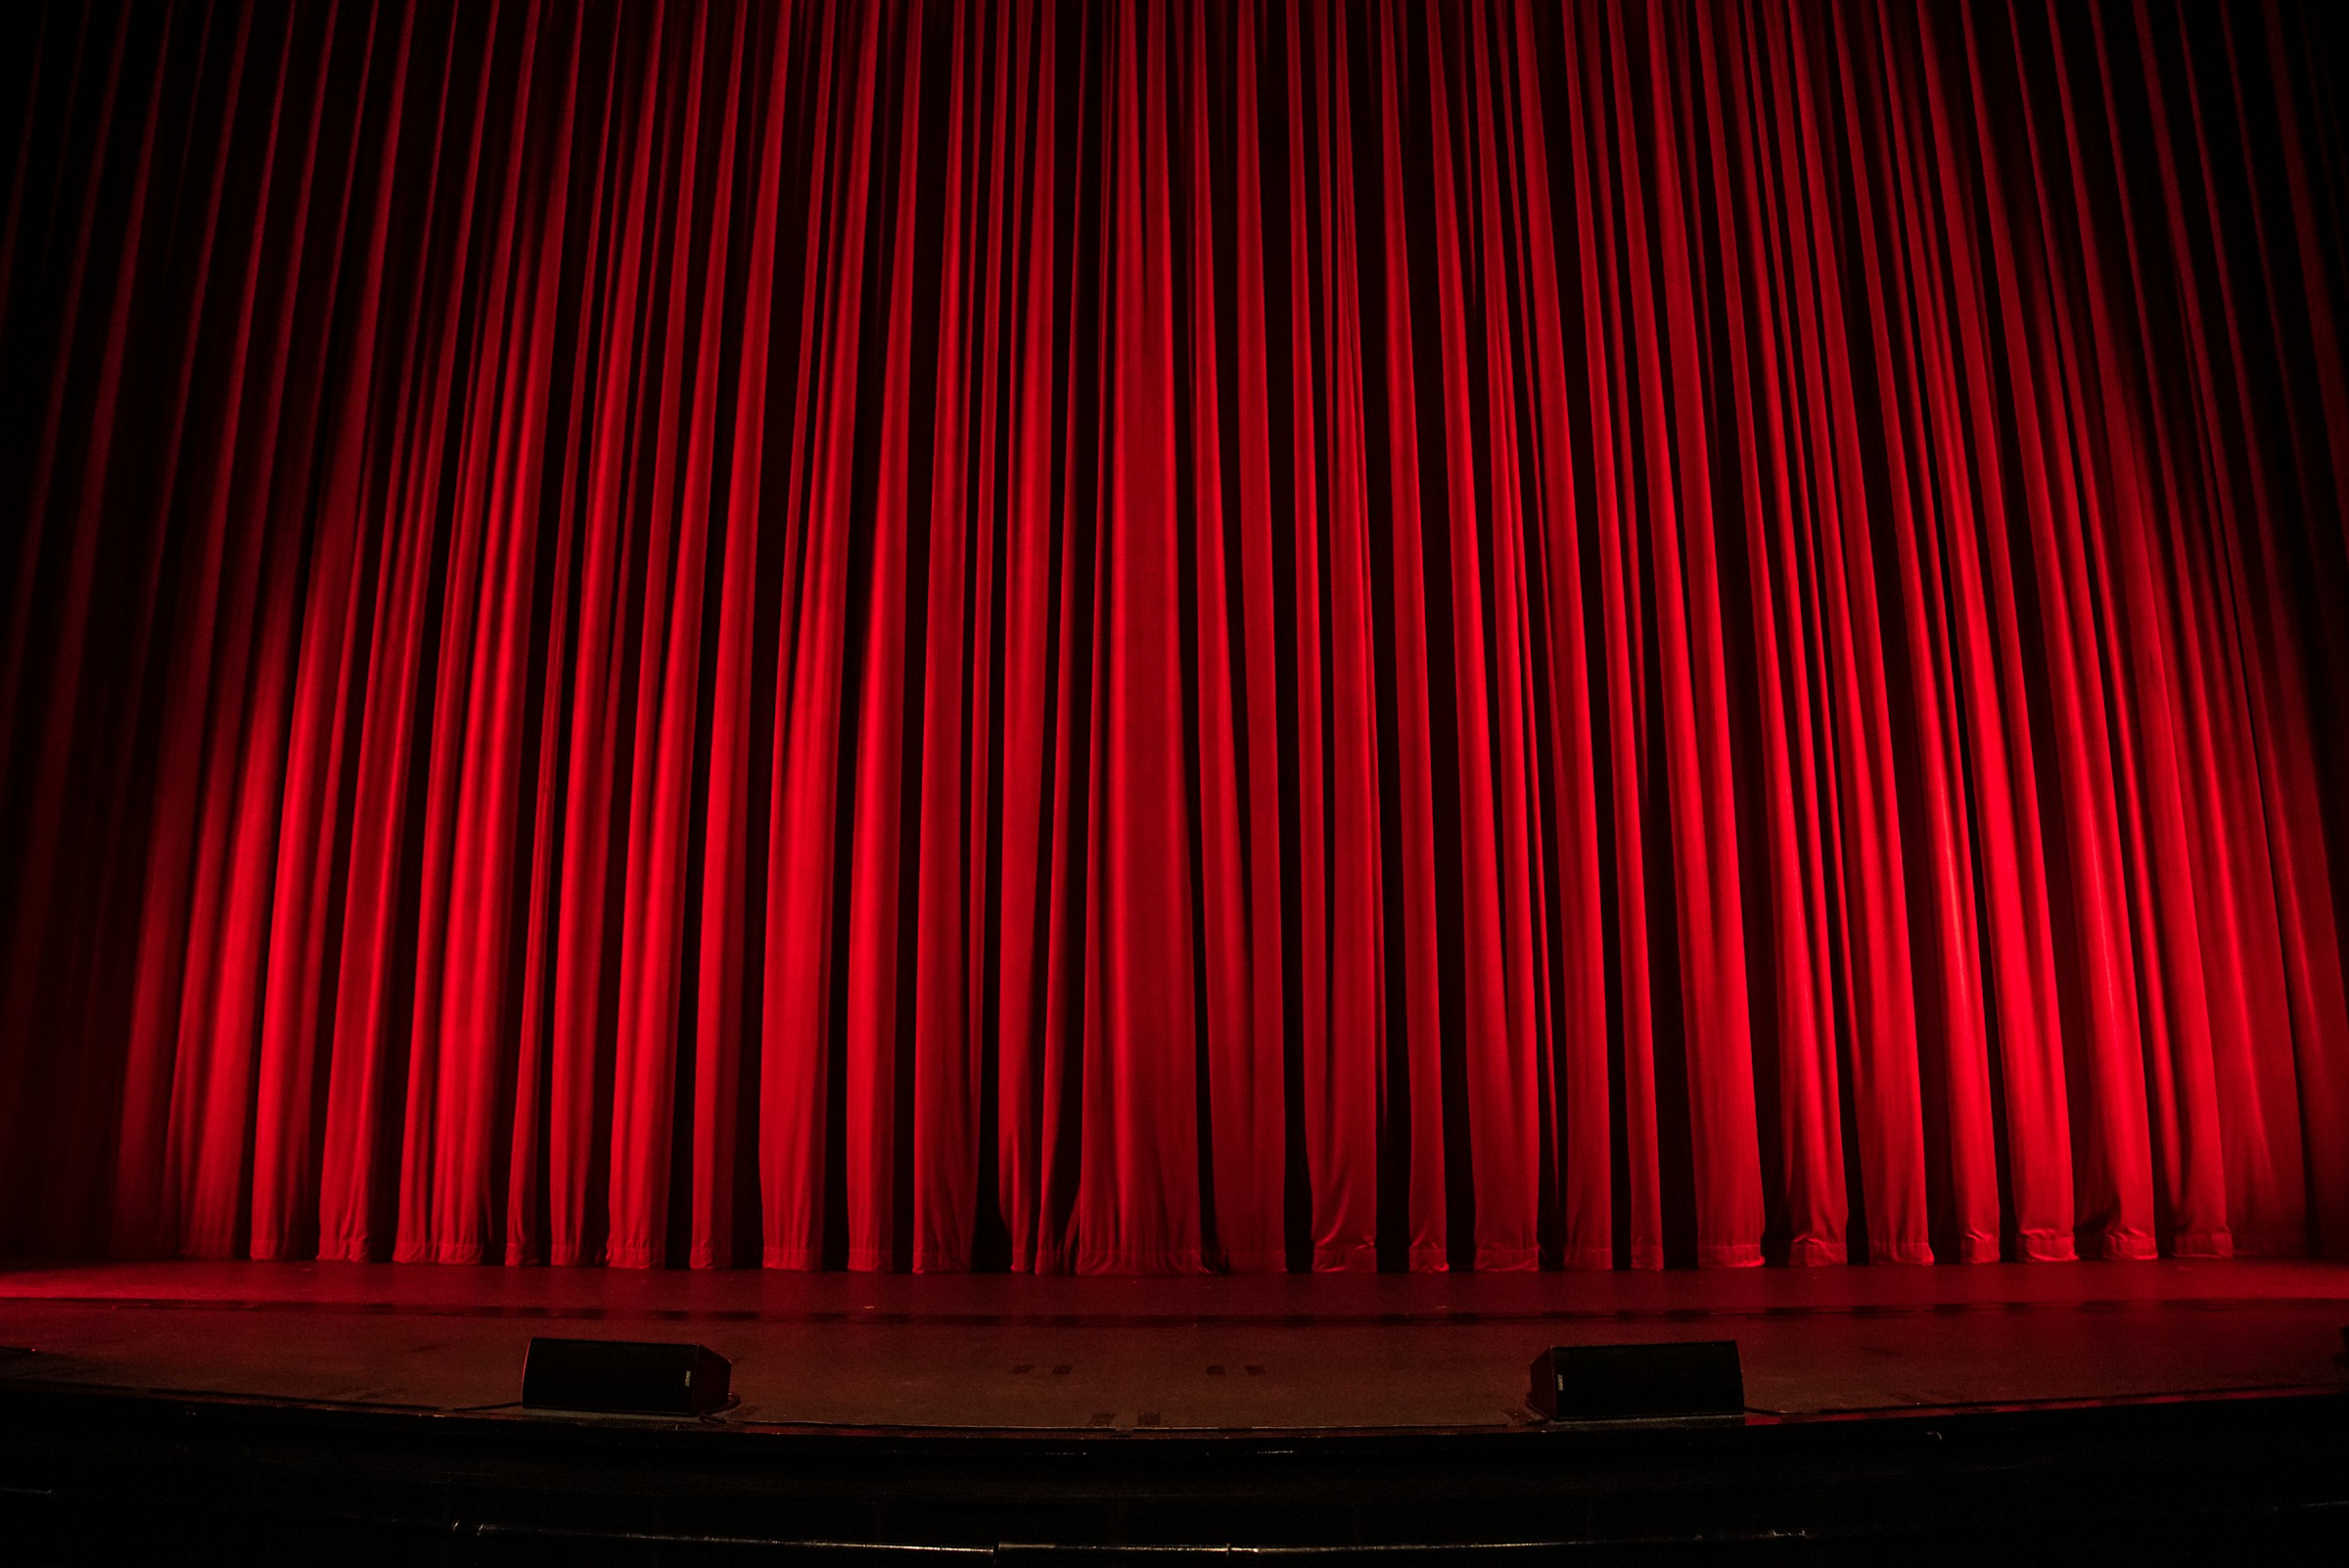 A red curtain at a theatre | Source: Unsplash